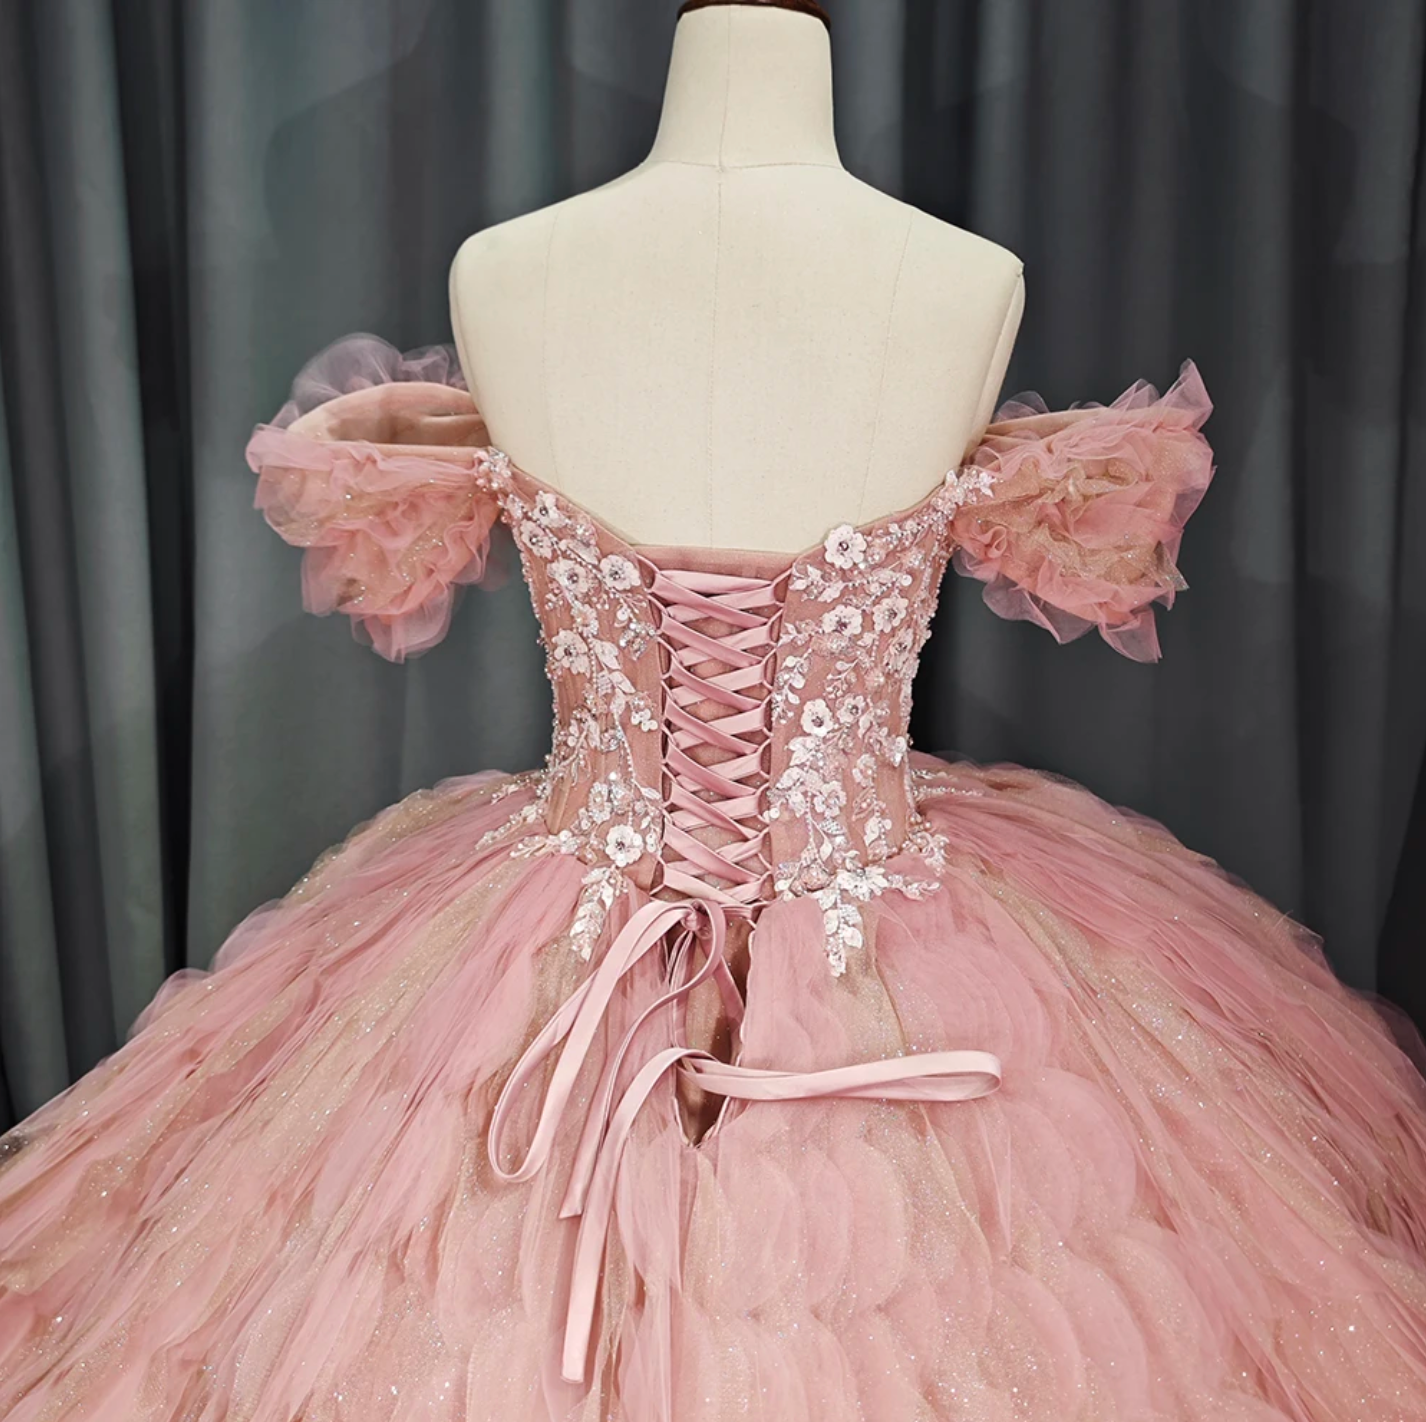 Tulle Tufted Pink Floral Quinceañera Ball Gown Dress